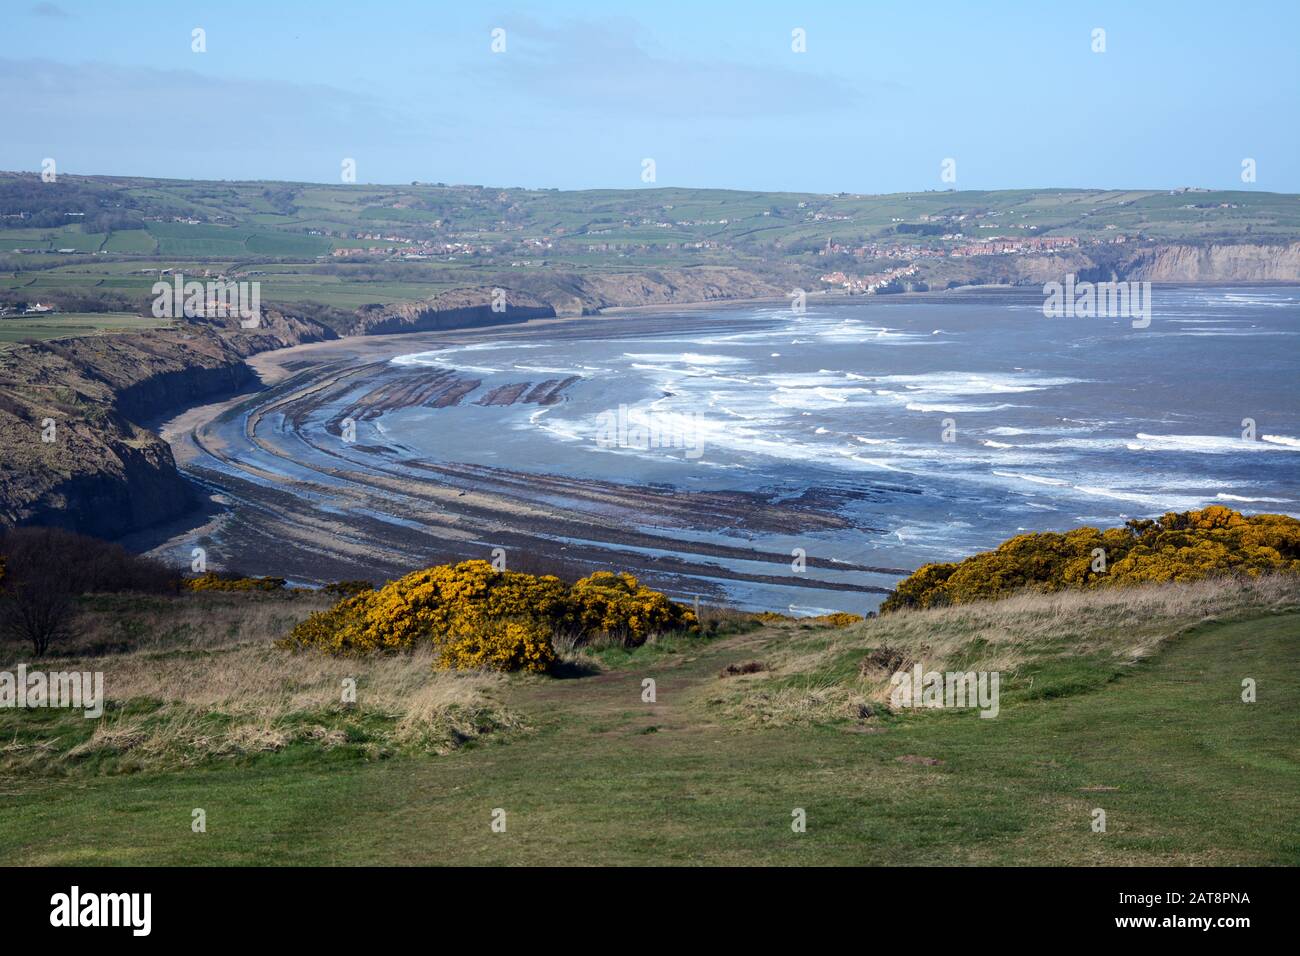 A view of Robin Hood's Bay and the North Sea at low tide, North York Moors National Park, Yorkshire, England, United Kingdom. Stock Photo